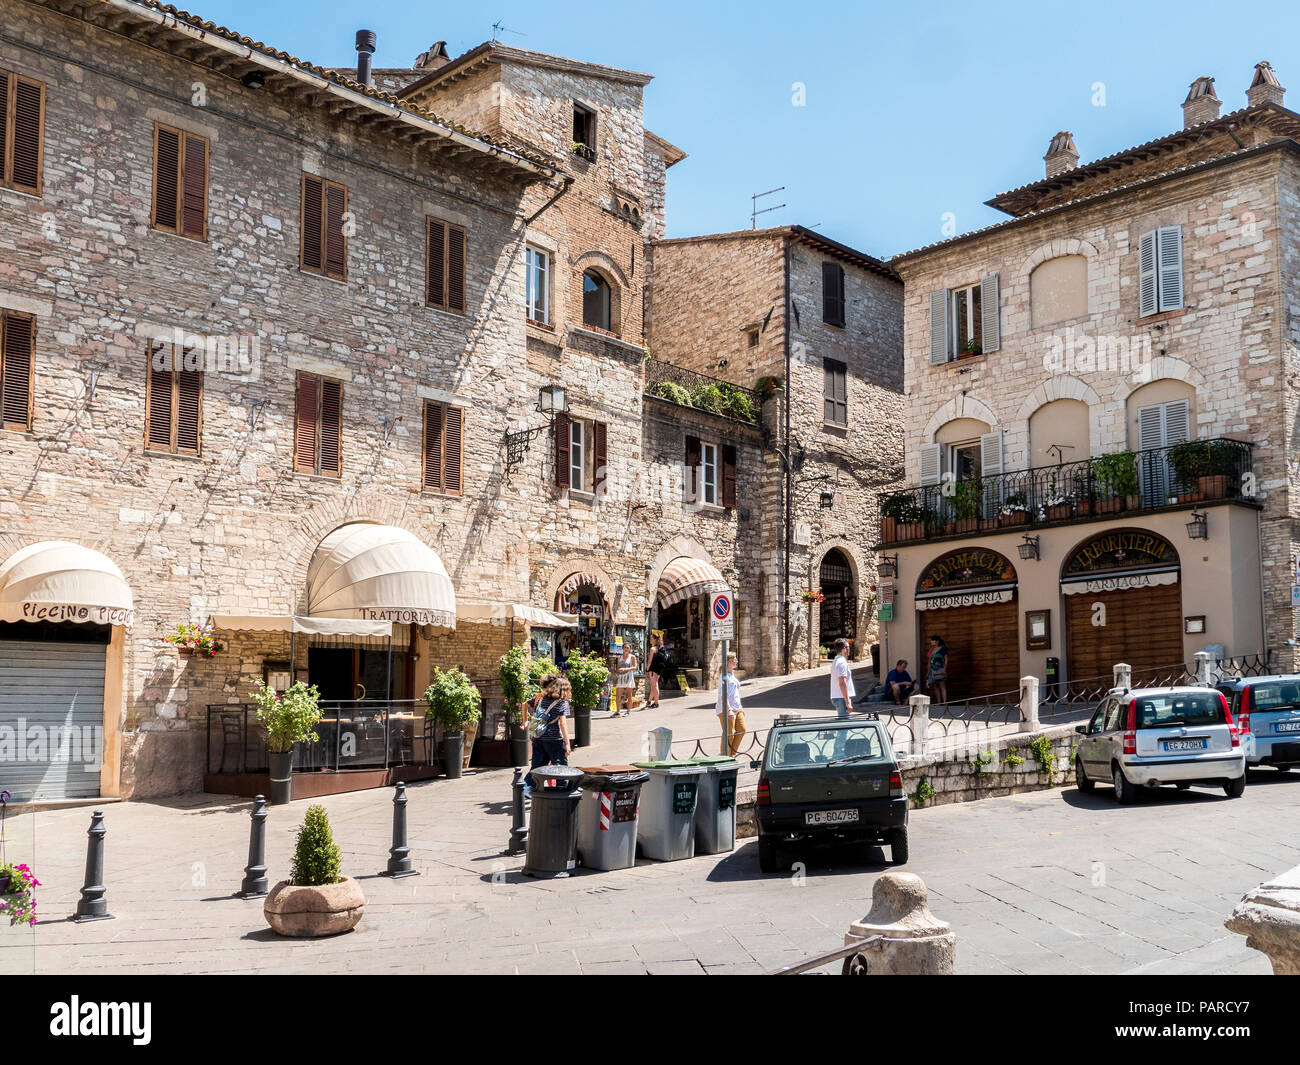 Shops in the medieval town plaza of Assisi in Italy Stock Photo - Alamy